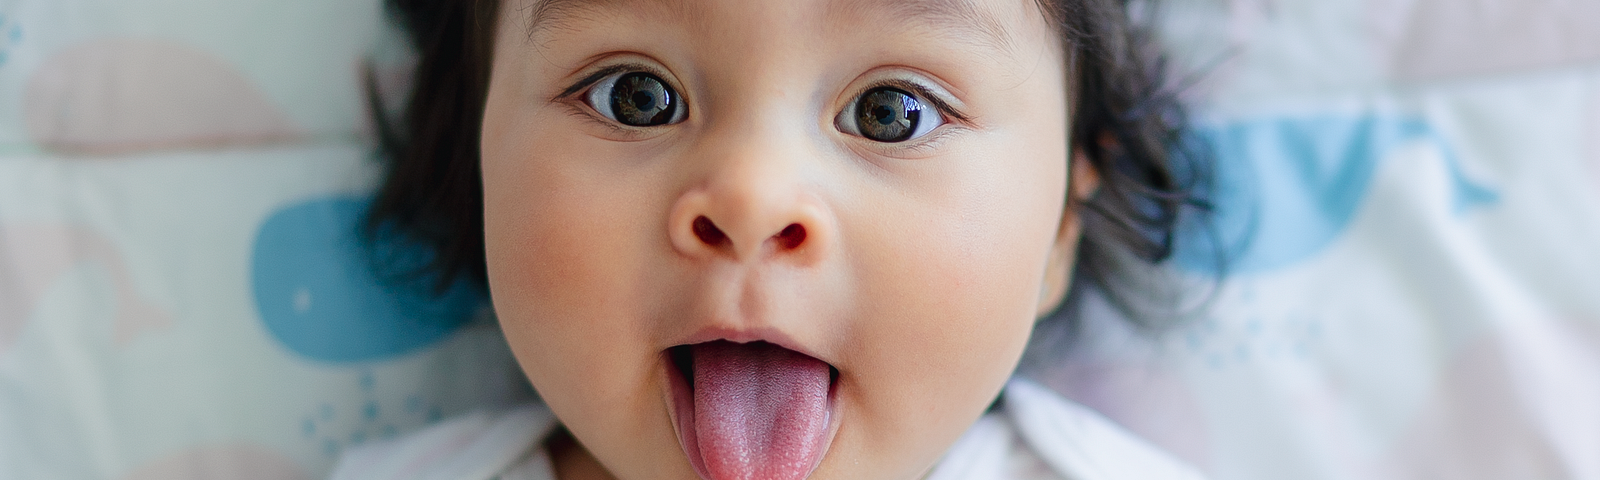 On a baby’s little shirt is written “One of a Kind.” The infant has a round face, dark hair, and sticks our her tongue at the photographer.